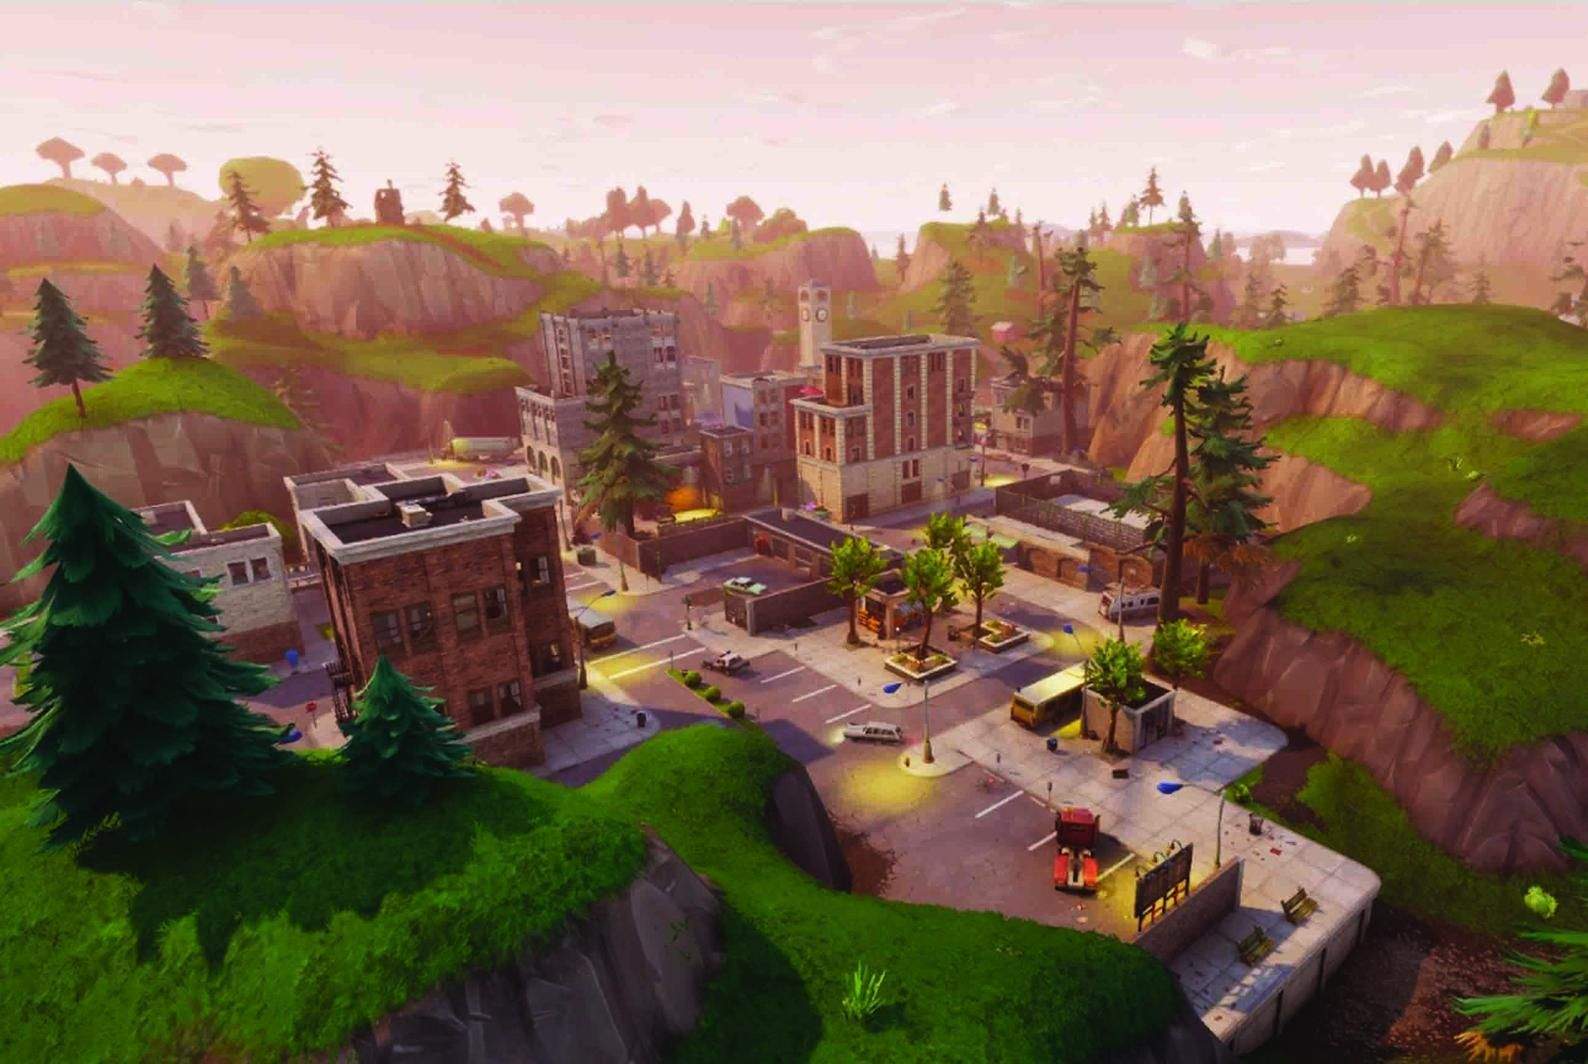 Tilted Towers Free For All